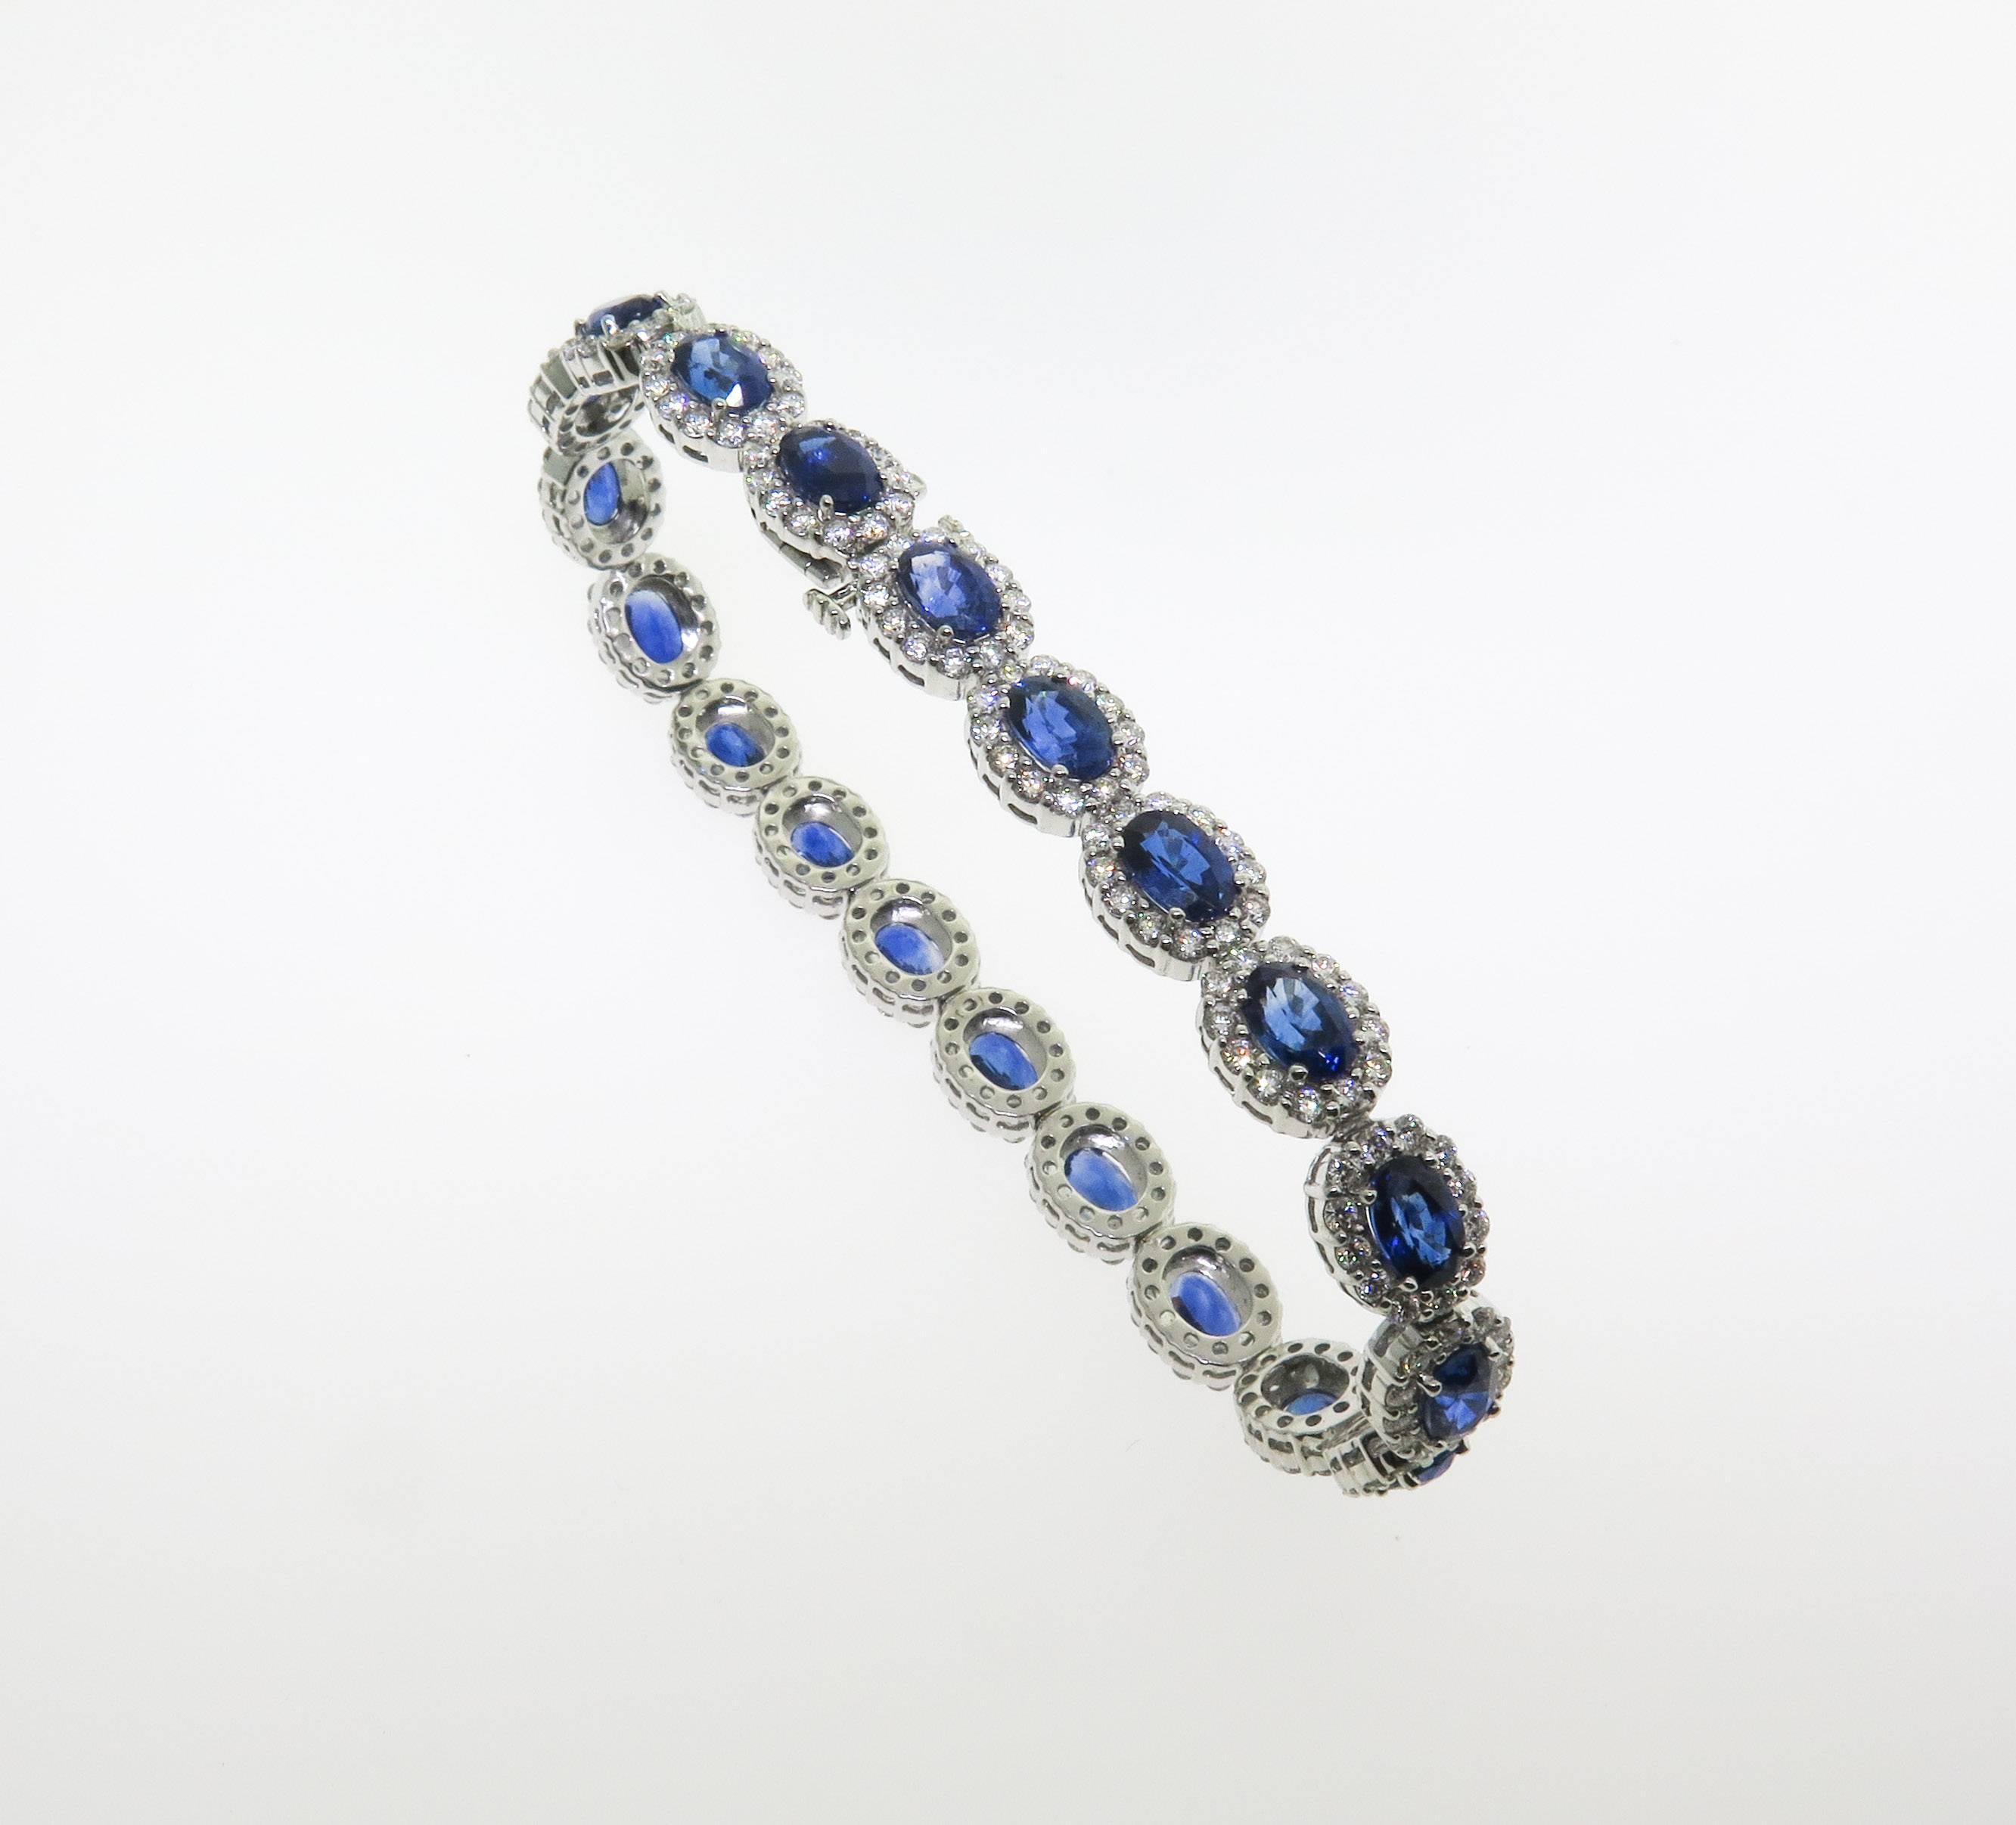 Magnificently matched 20 faceted oval sapphires, prong set in frames. Surrounding the sapphires are halo's of brilliant cut white diamonds having a total weight of 4.17 carats. Combining blue sapphires with diamonds always results in a stunning